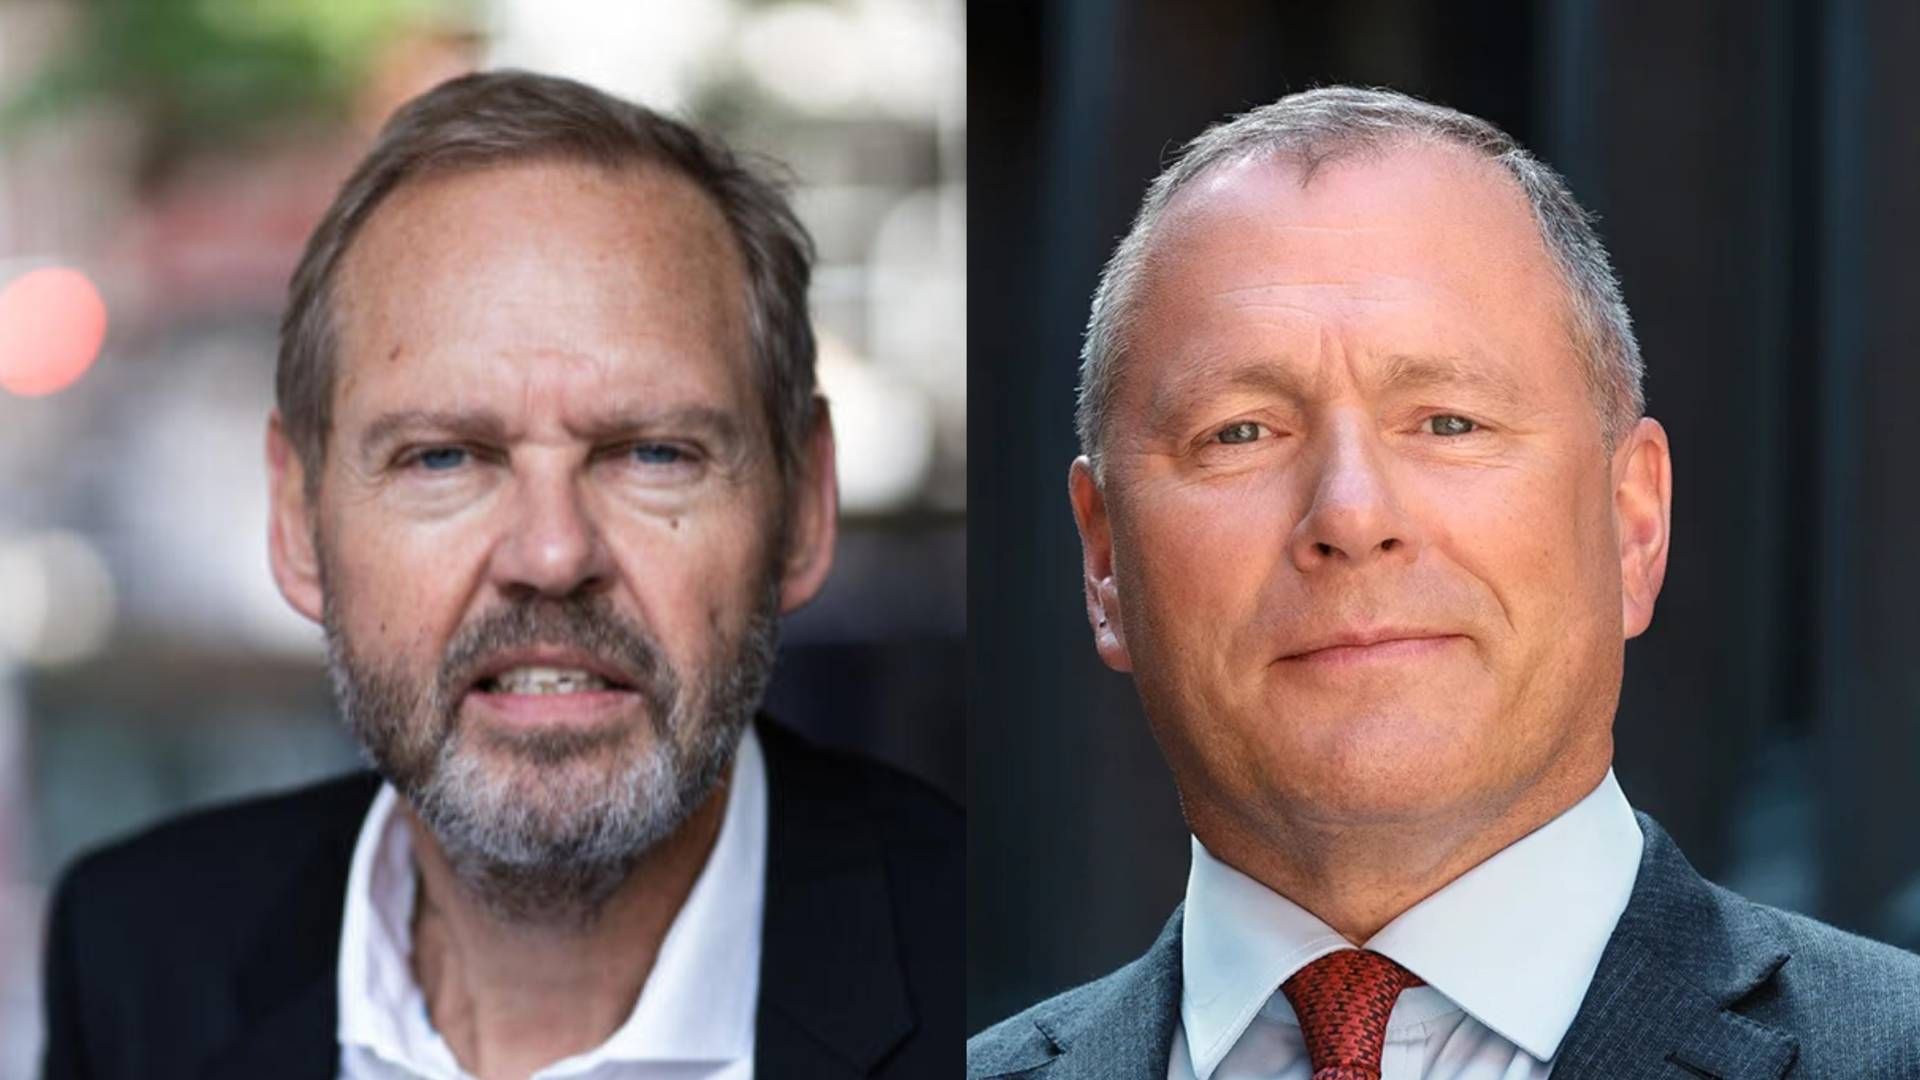 Flemming Højbo (right) writes analyses for AMWatch about the Nordic asset and wealth management sector. In this piece, he discusses the latest refusal of Norway's government to follow the request of the oil fund CEO, Nicolai Tangen, to invest in private equity. | Photo: PR / Jan Bjarke Mindegaard / NBIM